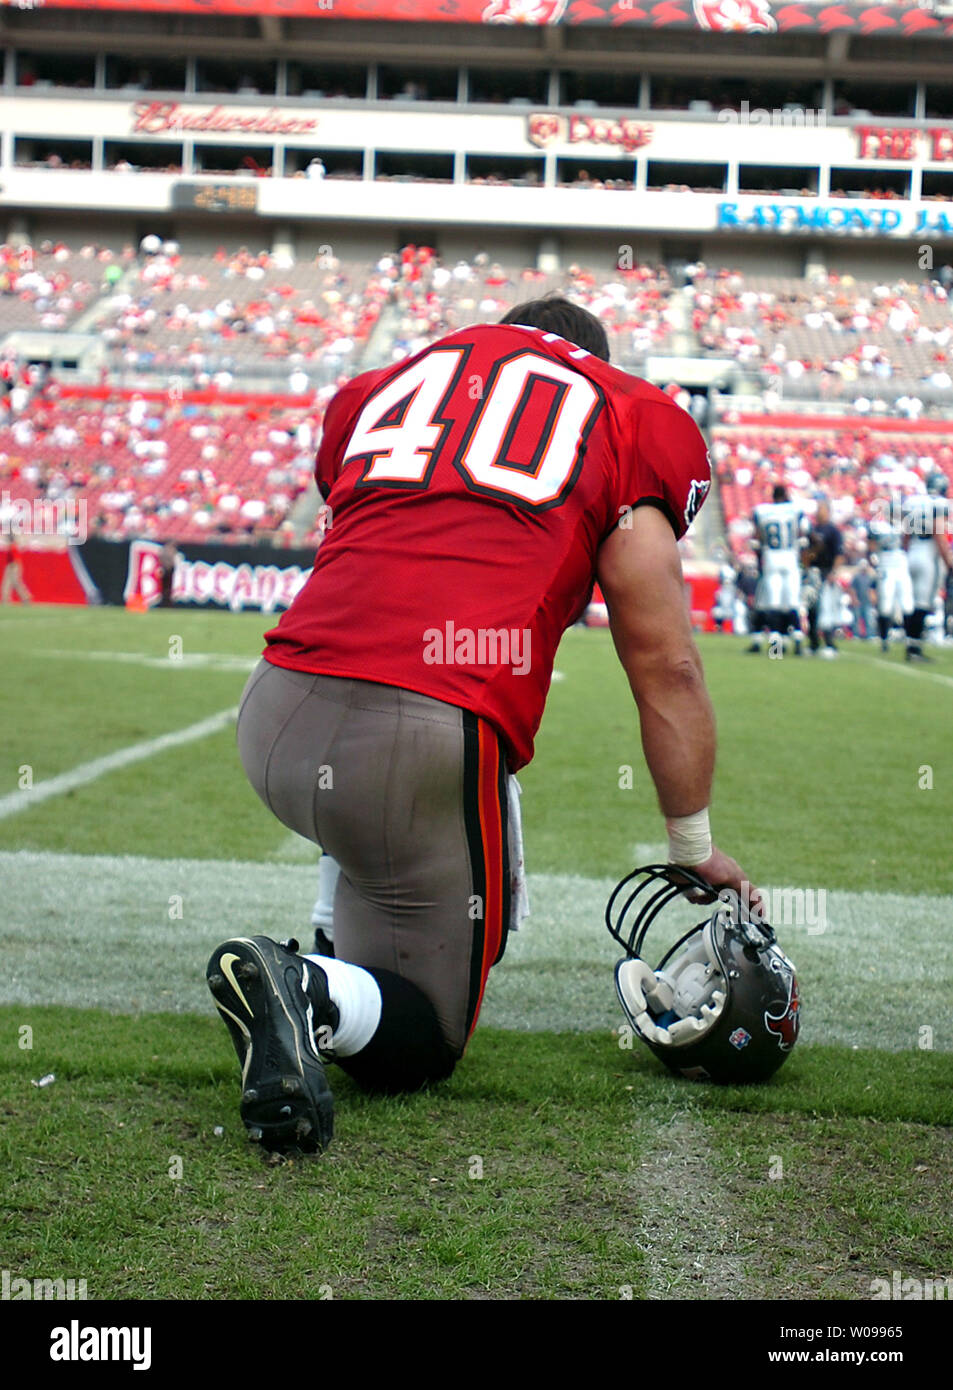 Bucs legend Mike Alstott talks 'honor' working with US troops in Germany  before historic NFL game